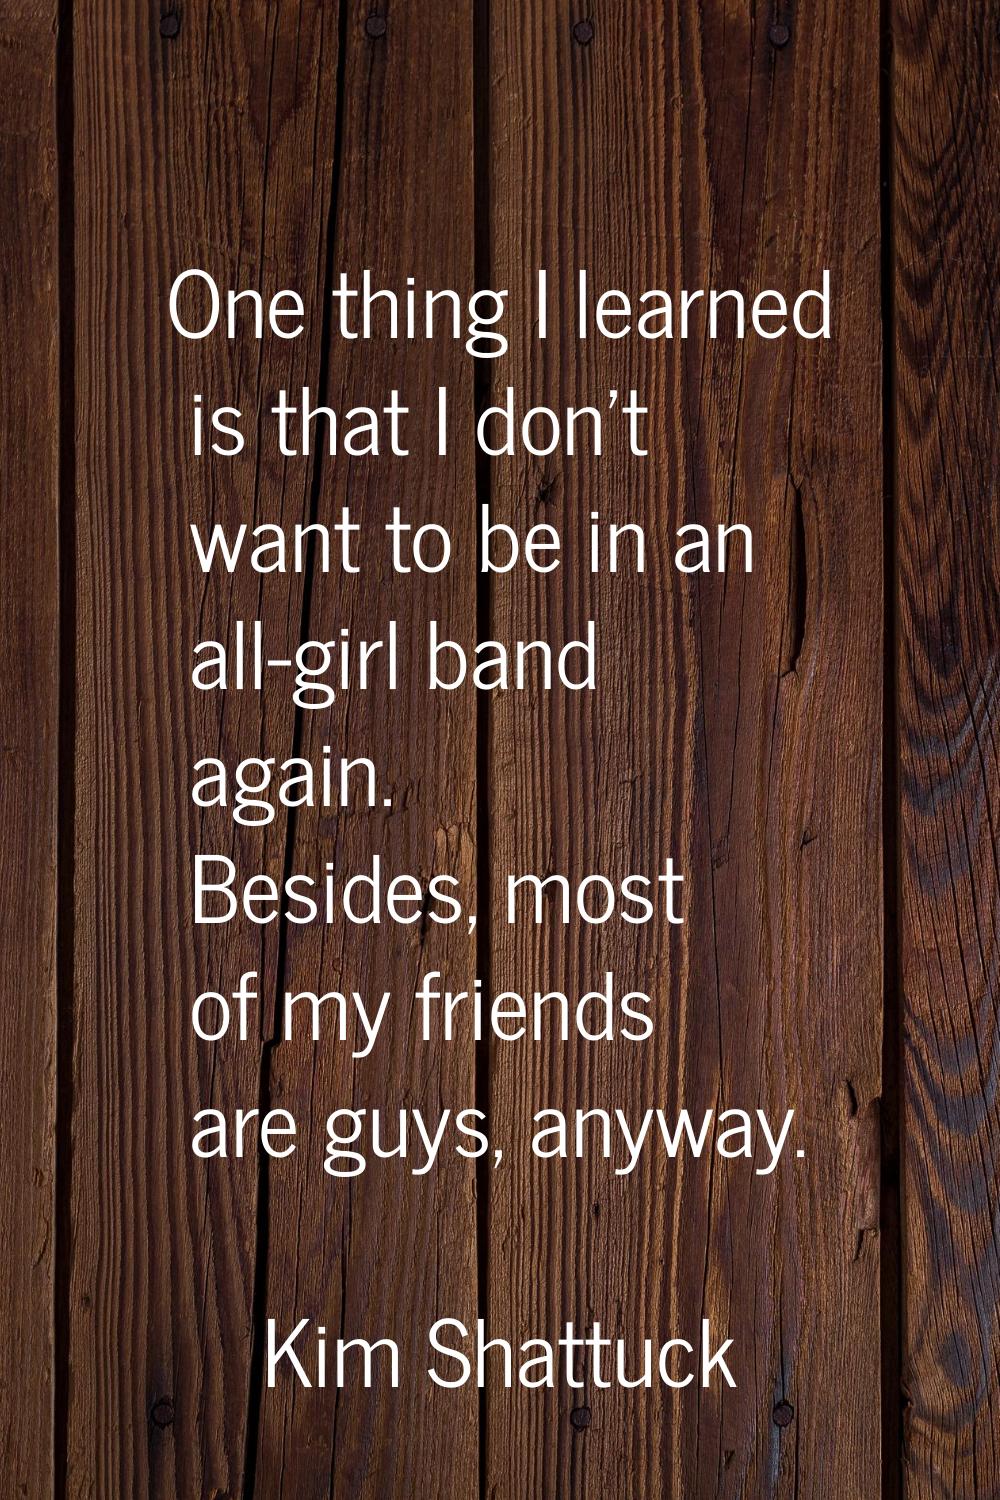 One thing I learned is that I don't want to be in an all-girl band again. Besides, most of my frien